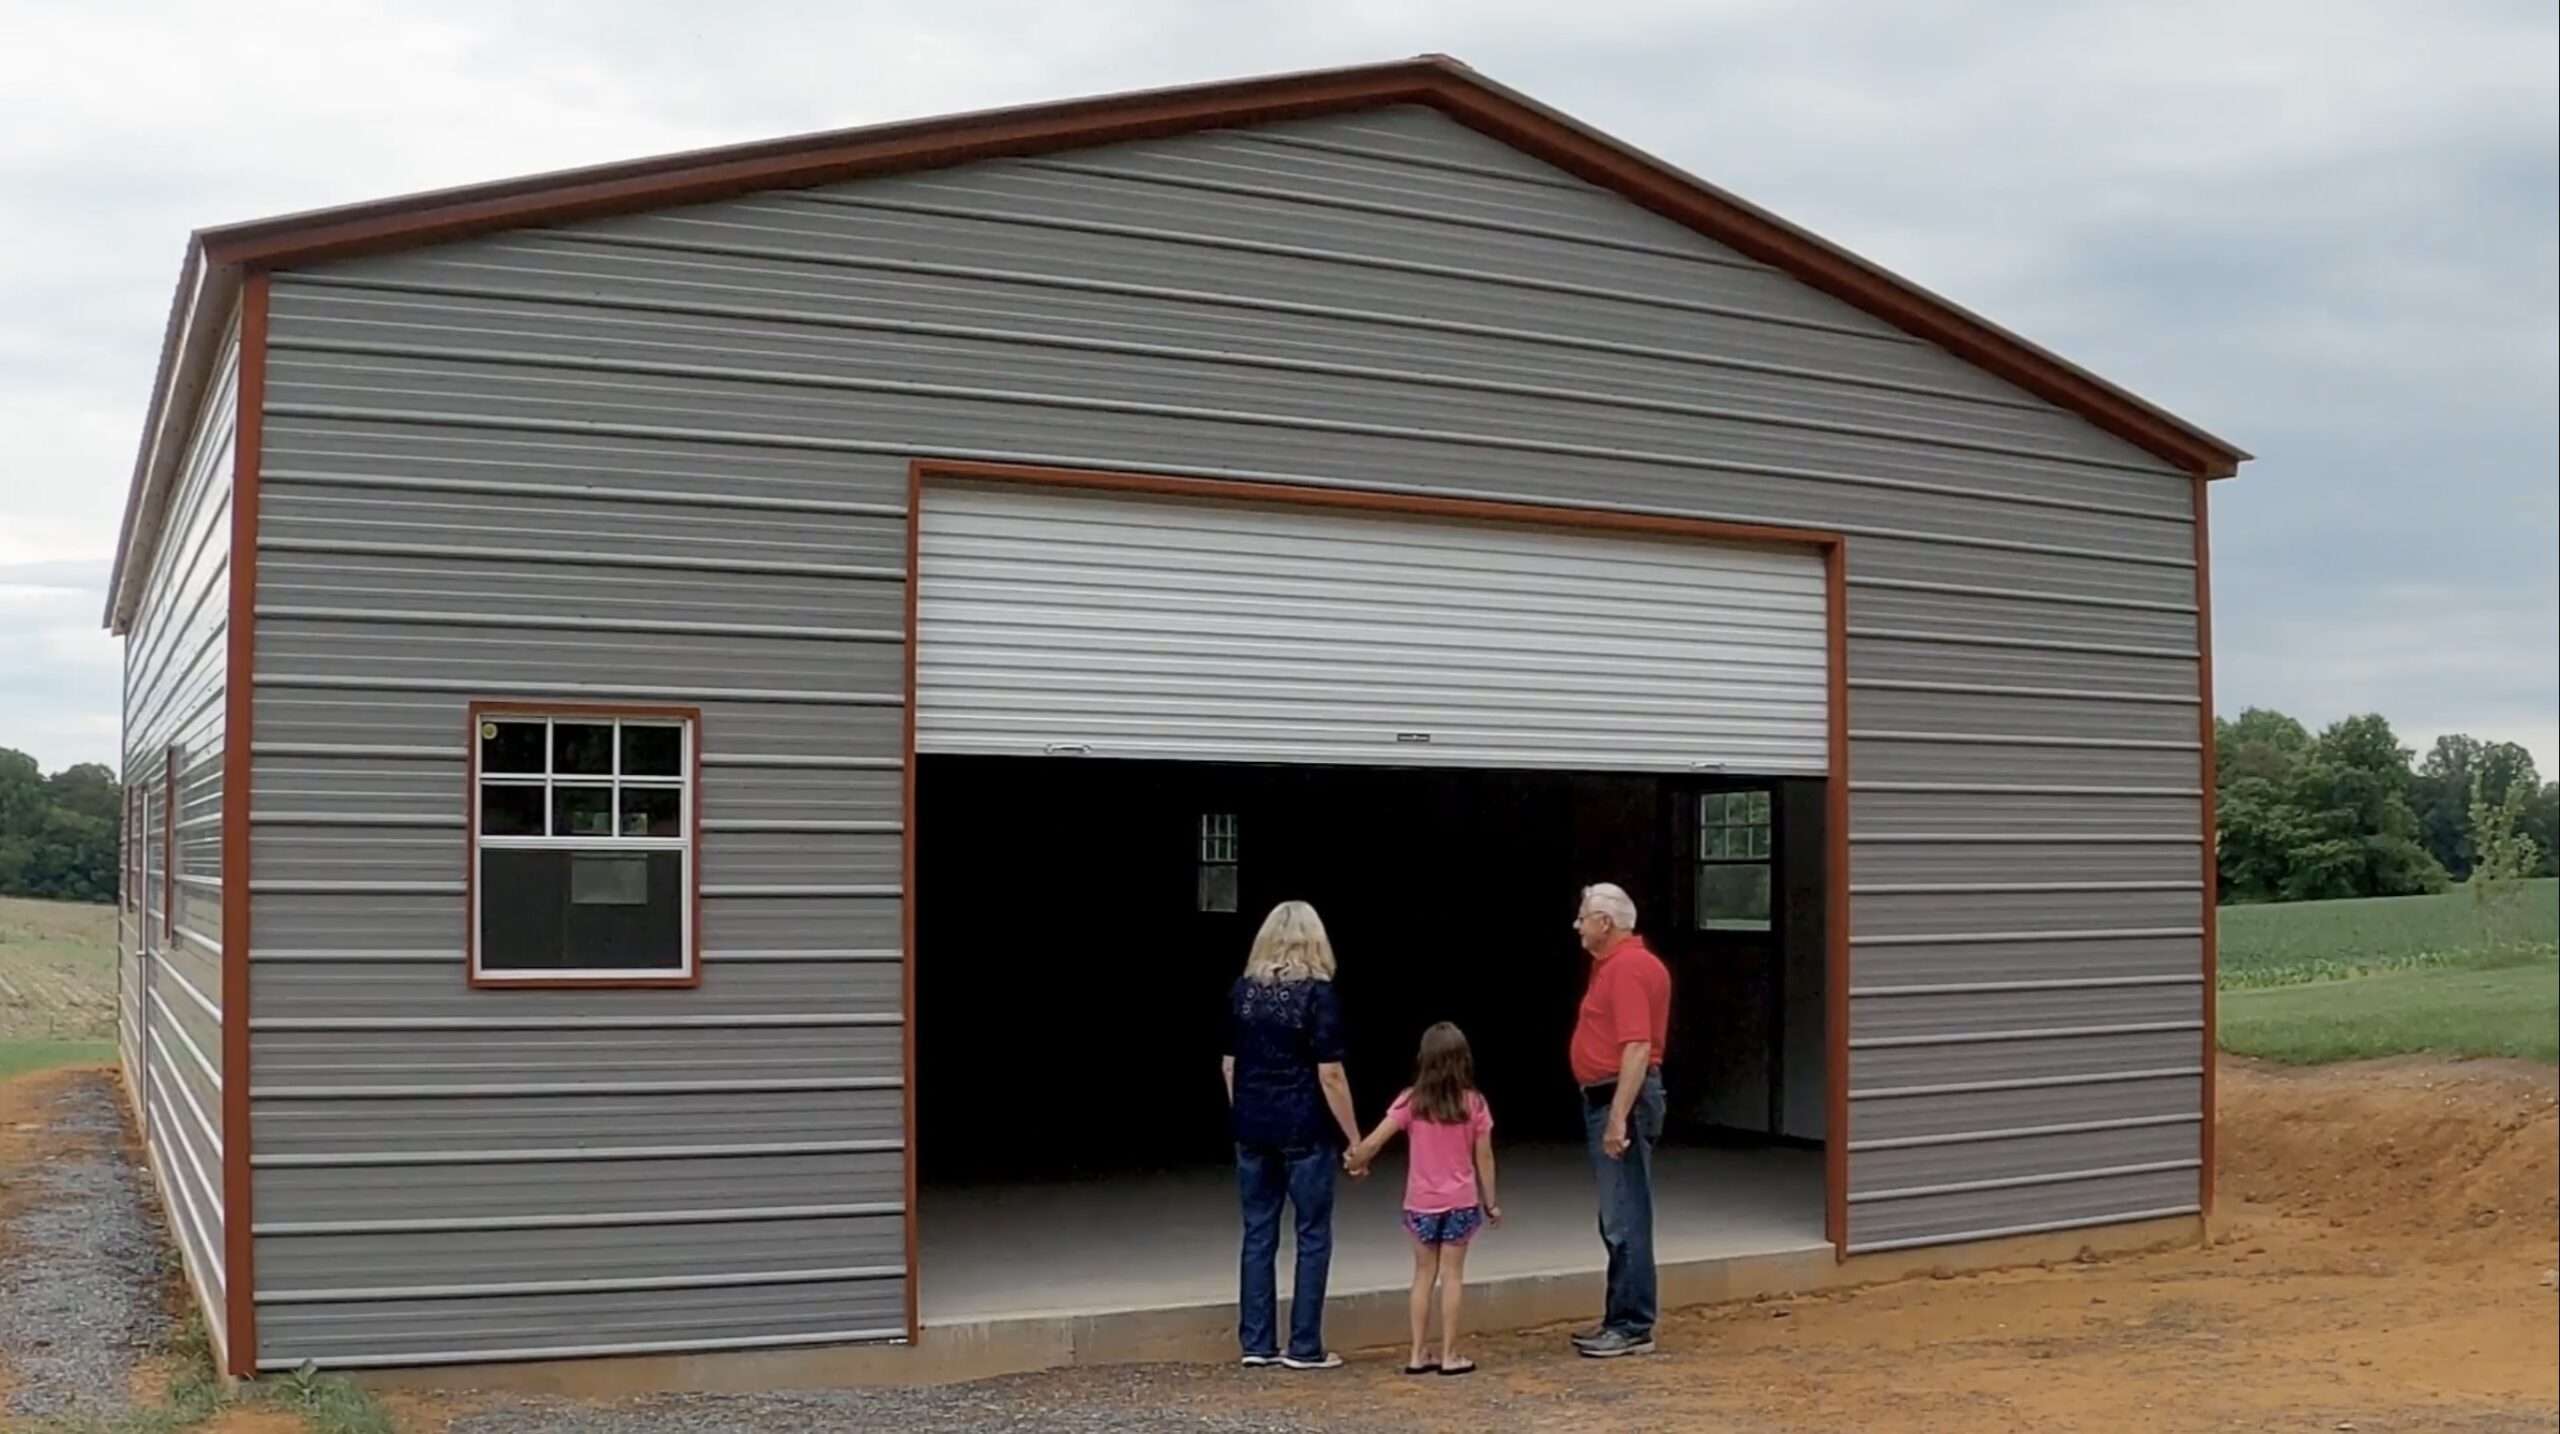 A metal building warehouse that was built during the child's grandparents